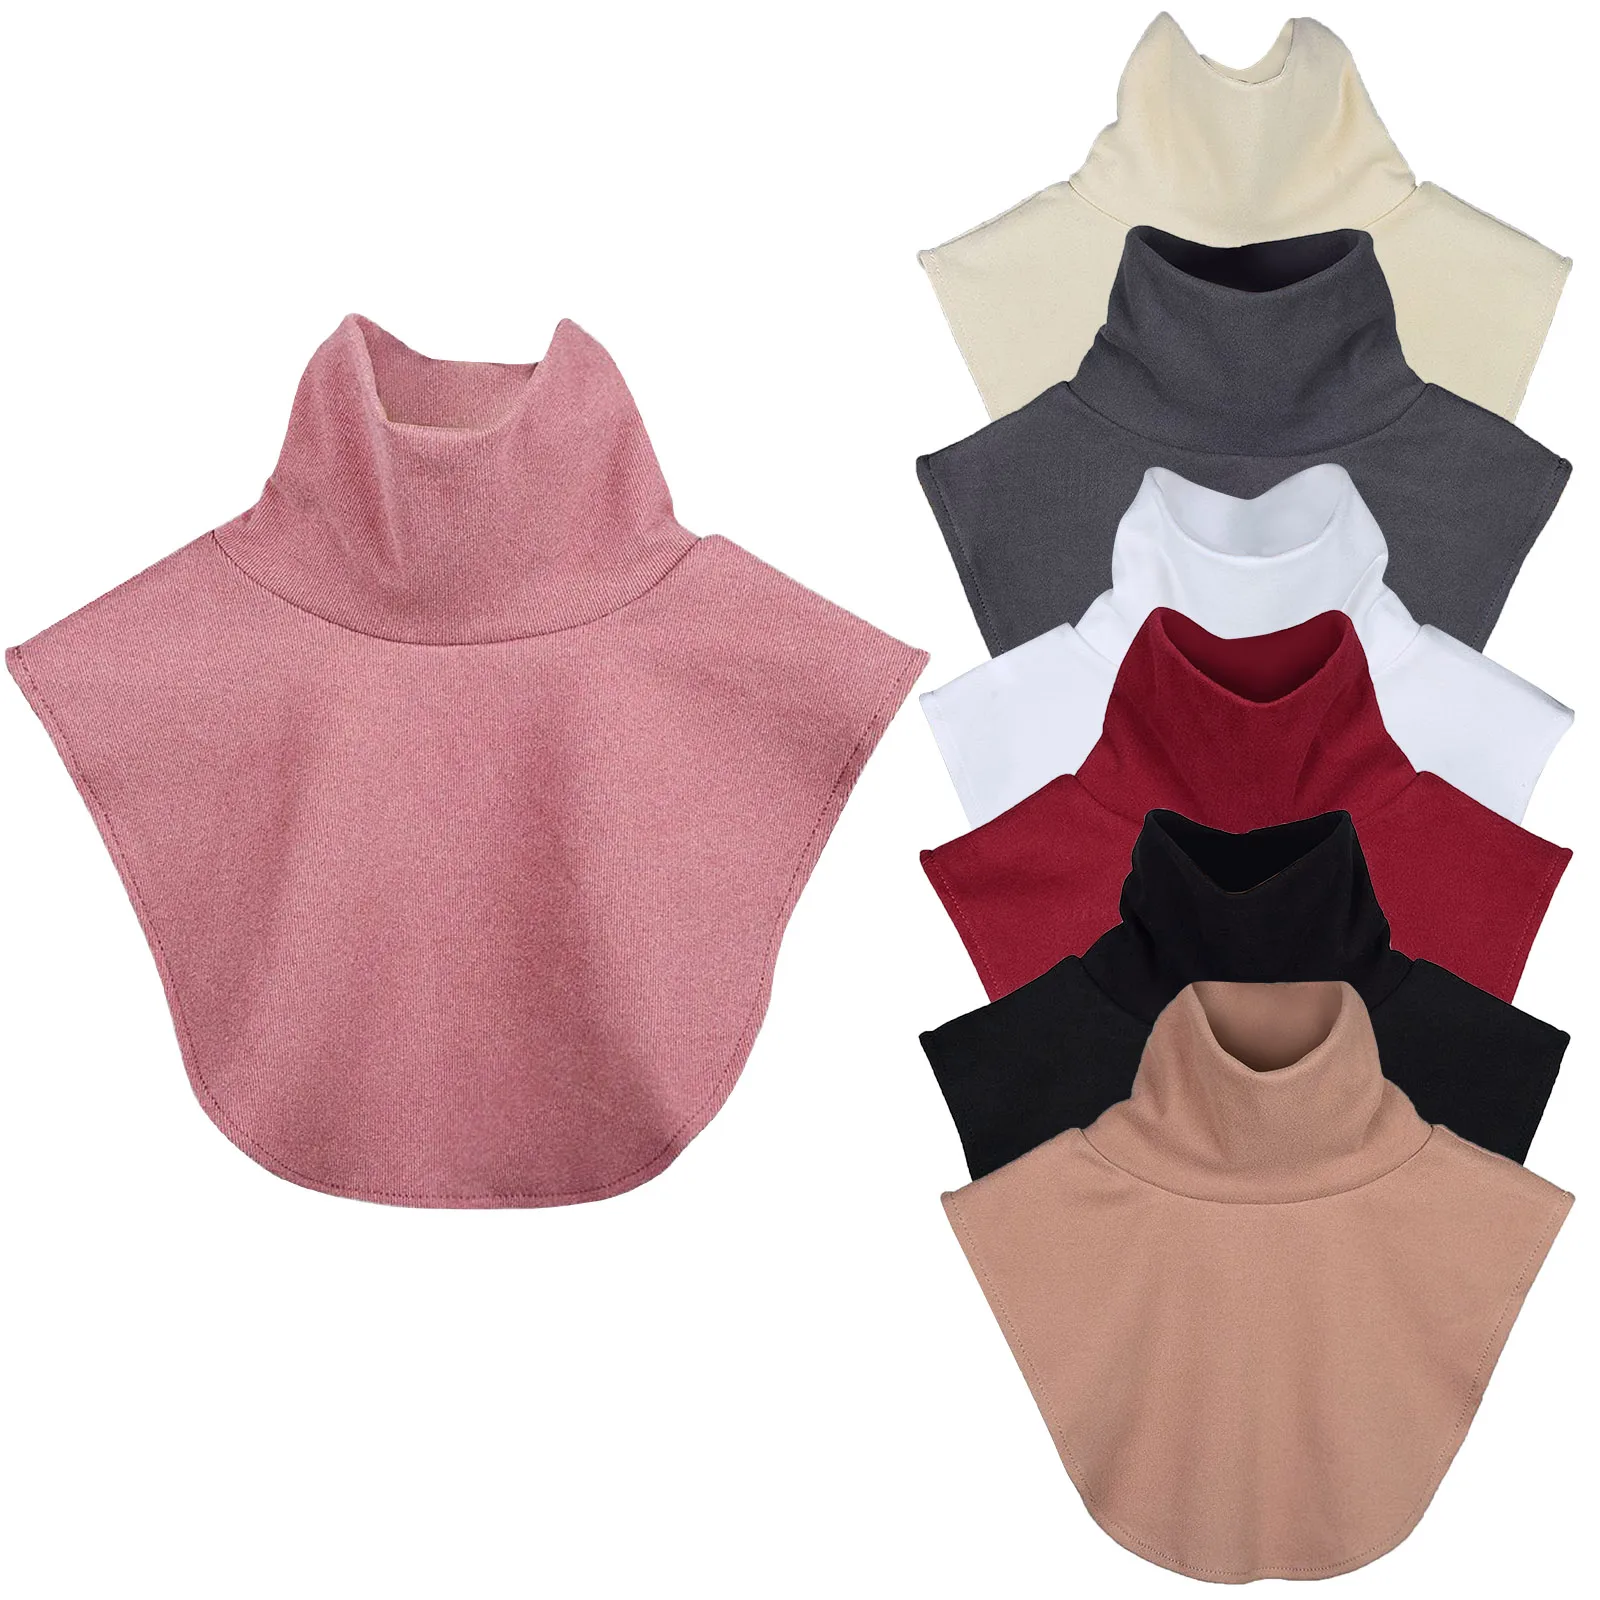 

Womens Turtleneck Fake Collar Islamic Hijab Extensions Solid Color Mock Neck Half Top Blouse Detachable Hijab Neck Warmer Dickey